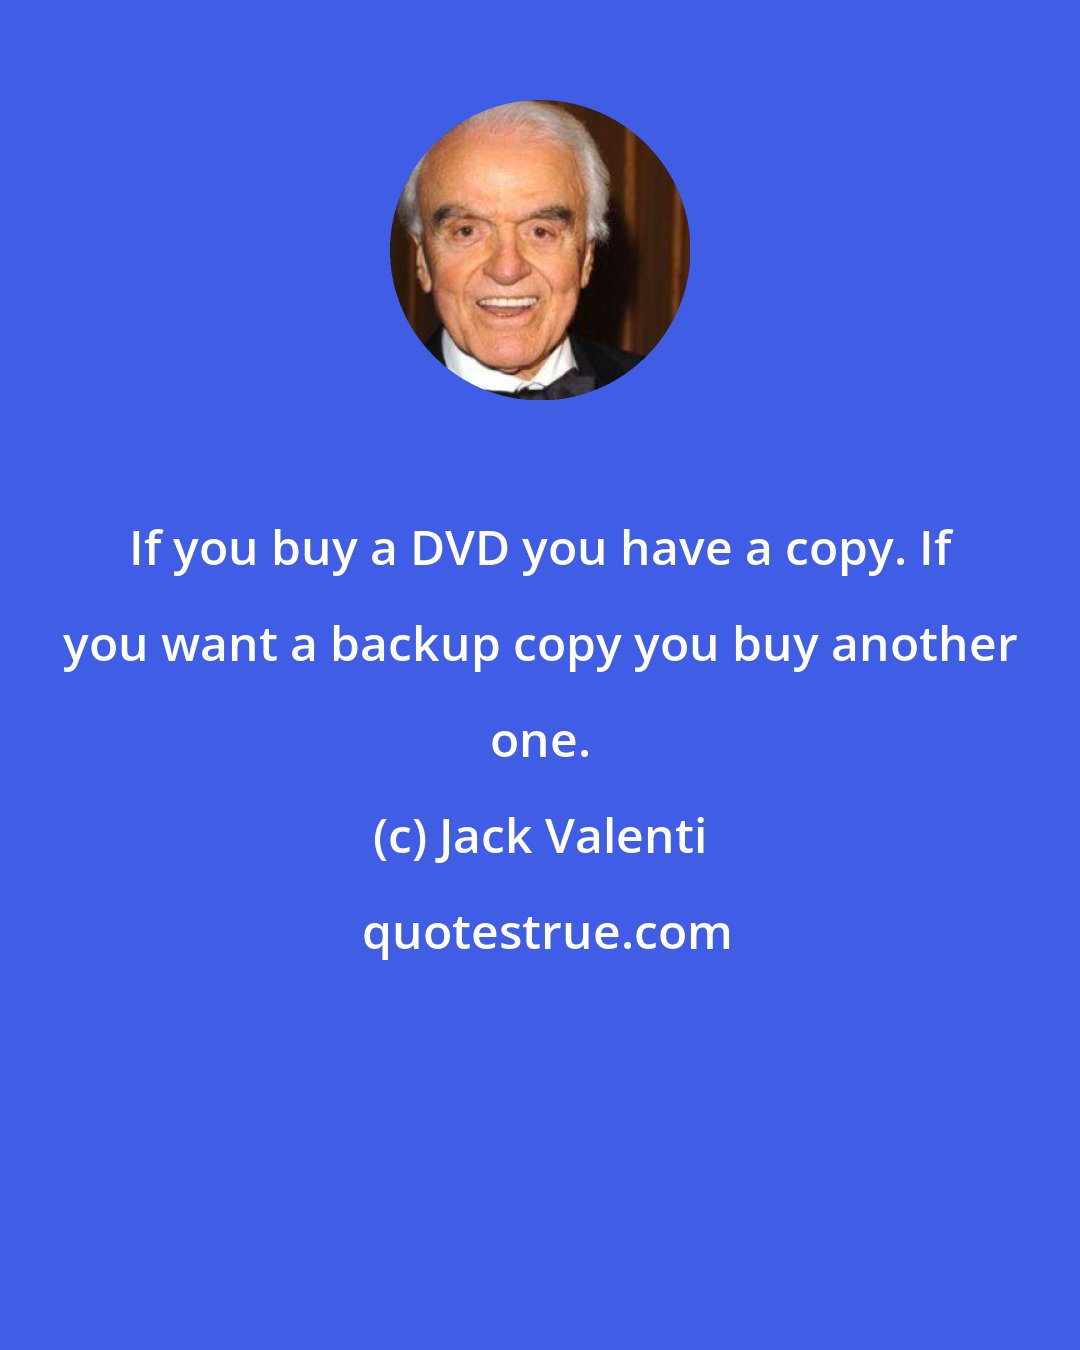 Jack Valenti: If you buy a DVD you have a copy. If you want a backup copy you buy another one.